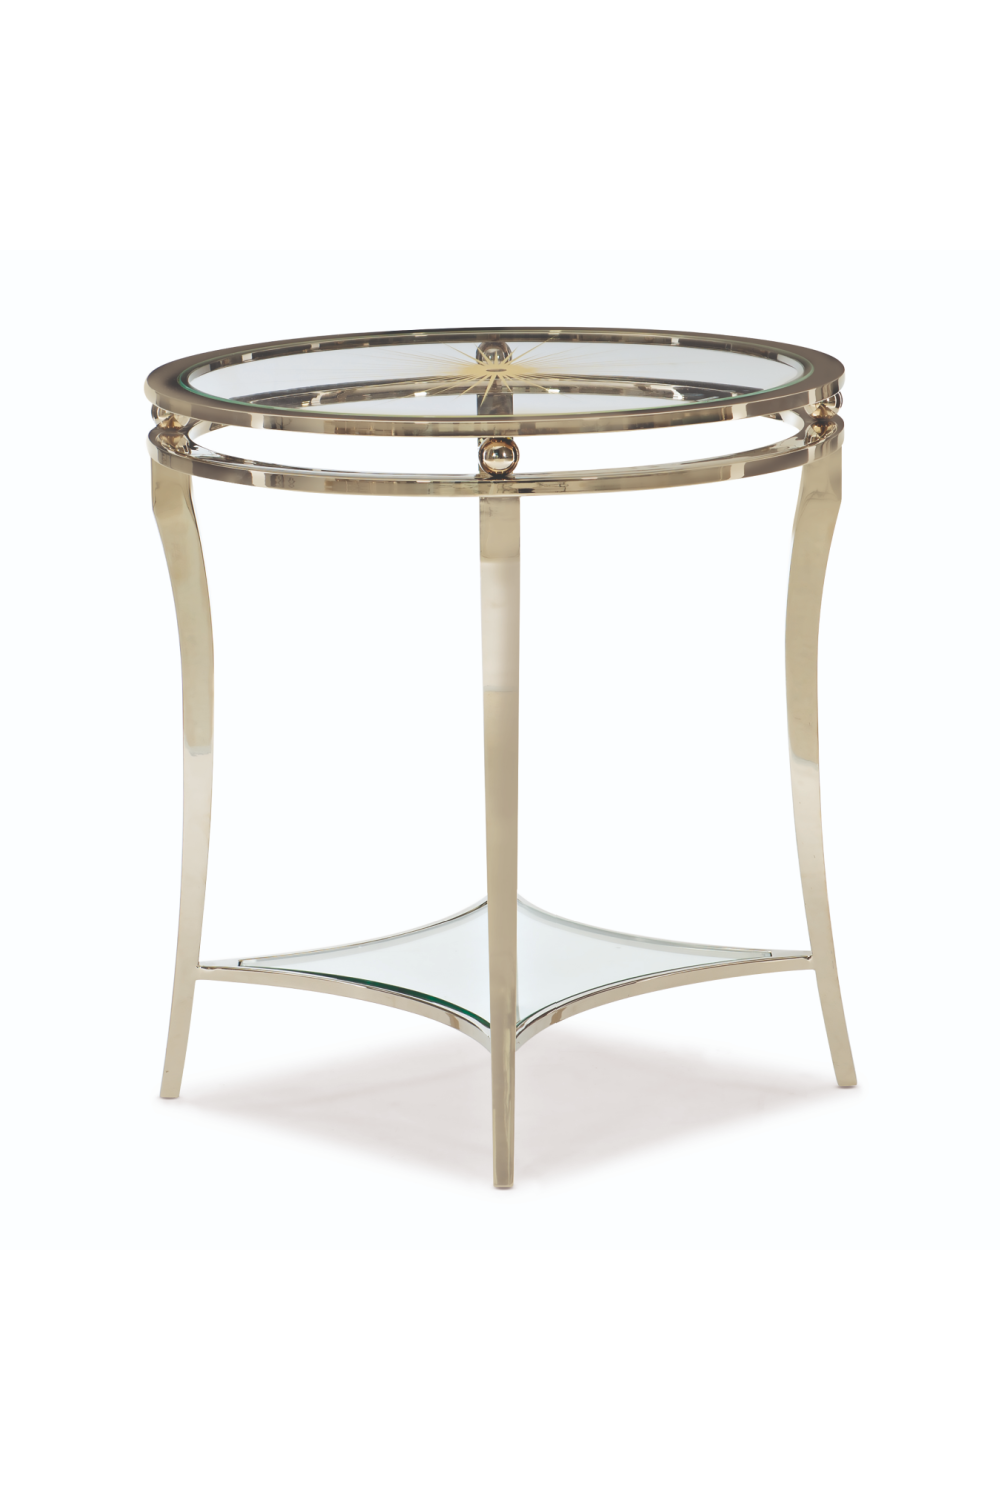 Starburst Patterned Side Table | Caracole Rising Star | Oroa.com